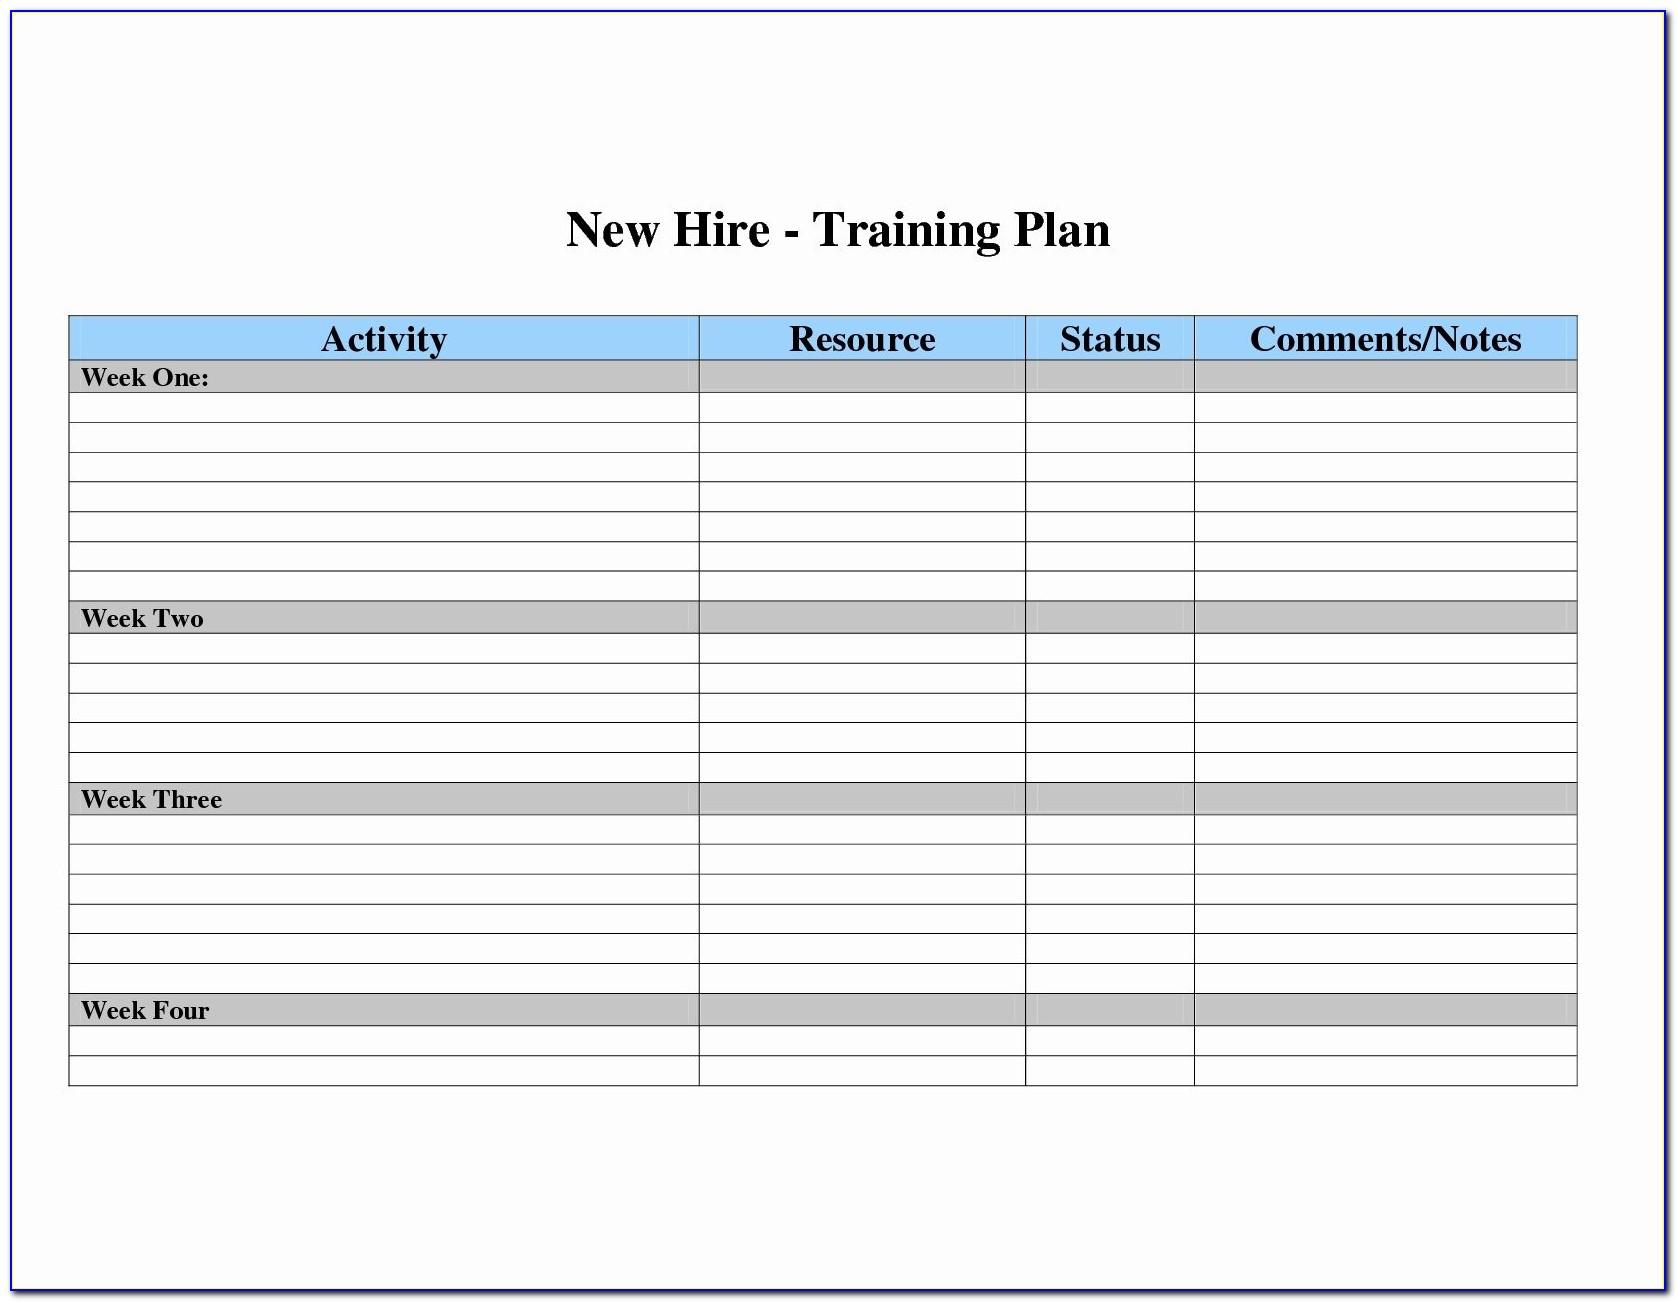 Staff Training Plan Template Excel